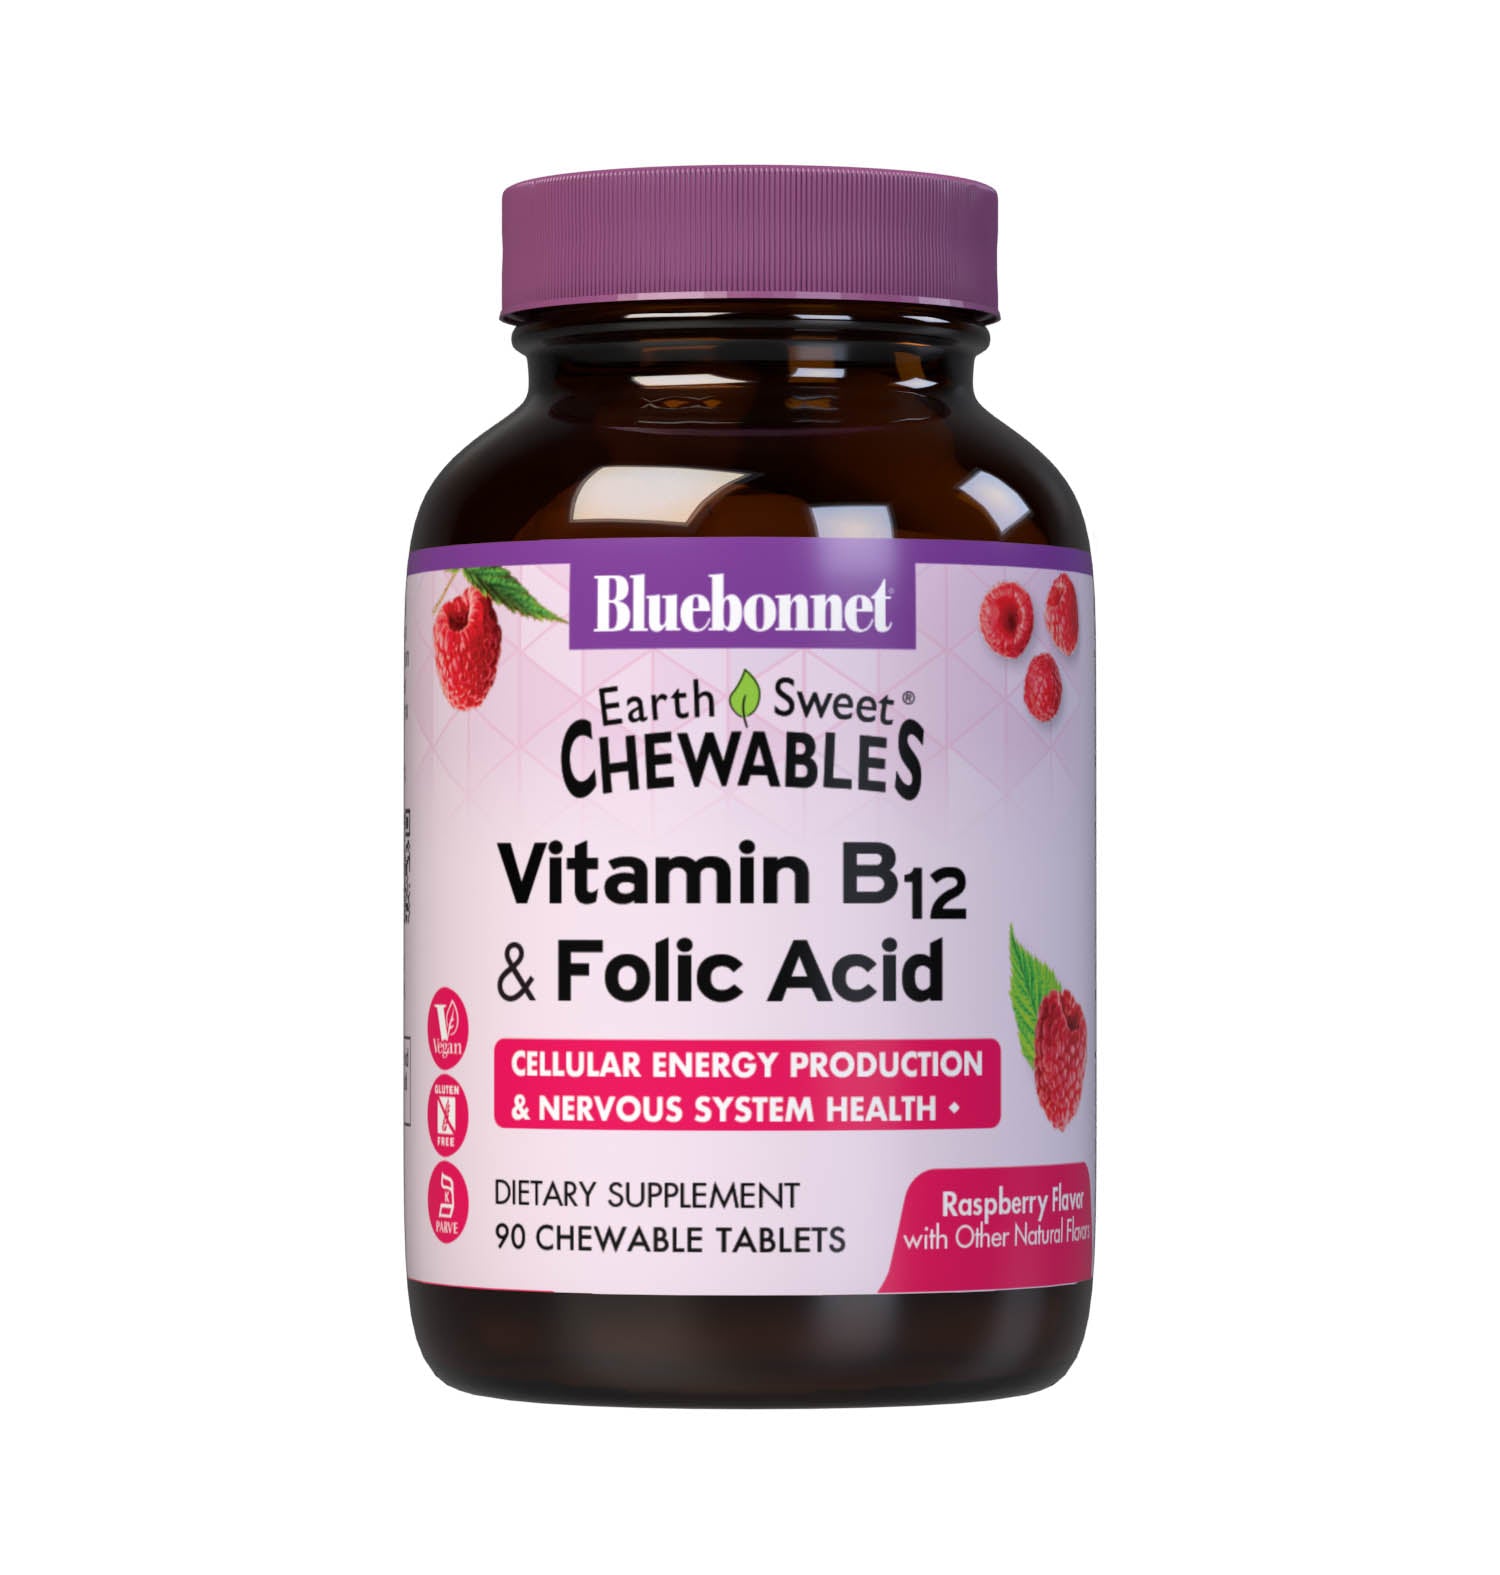 Bluebonnet’s EarthSweet Chewables Vitamin B12 & Folic Acid Tablets are formulated with crystalline vitamin B12 and folic acid that may support cellular energy production and nervous system health in a delicious raspberry flavor. Sweetened with EarthSweet, a proprietary sweetening mix of fruit powders and sugar cane crystals. #size_90 count